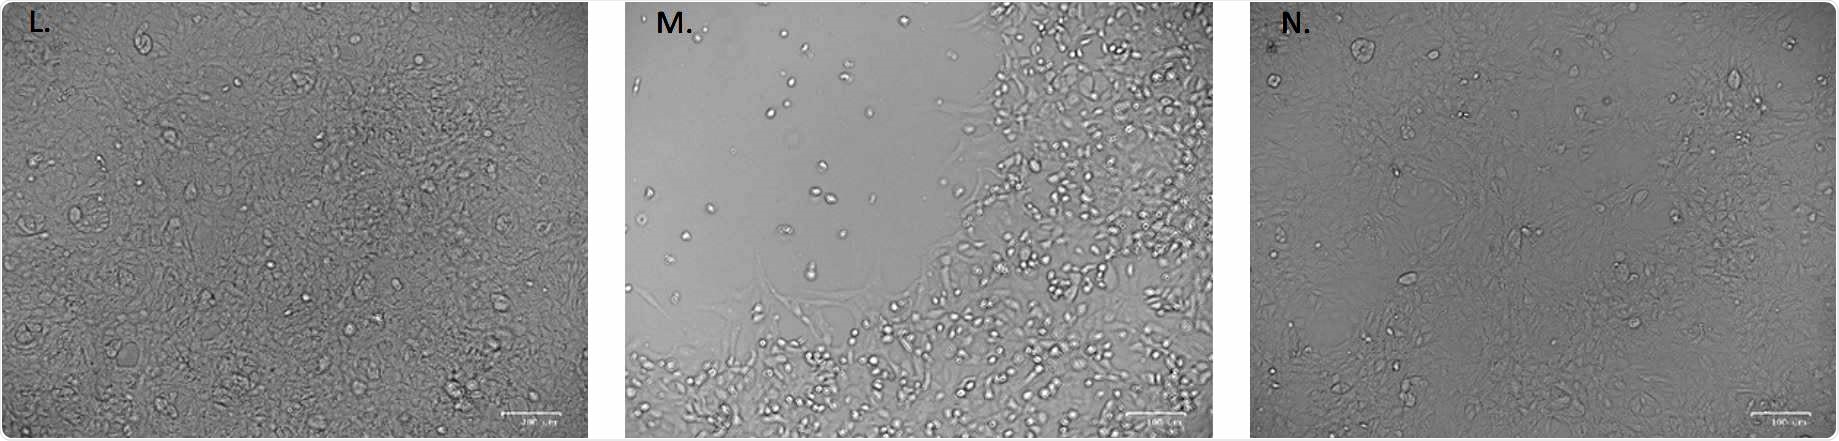 No cytopathic effect was observed in uninfected cultured VeroE6 monolayers maintained in 50mJ/cm2 UVTtreated complete medium for 72 hours. (M) In vitro infection of SARSTCoVT2 (5 MOI) UVTC untreated VeroE6 cells resulted in an evident cytopathic effect. (N) SARST CoVT2 irradiation with 3.7 mJ/cm2 UVTC rescued the cytopathic effect induced by UVTC untreated virus.